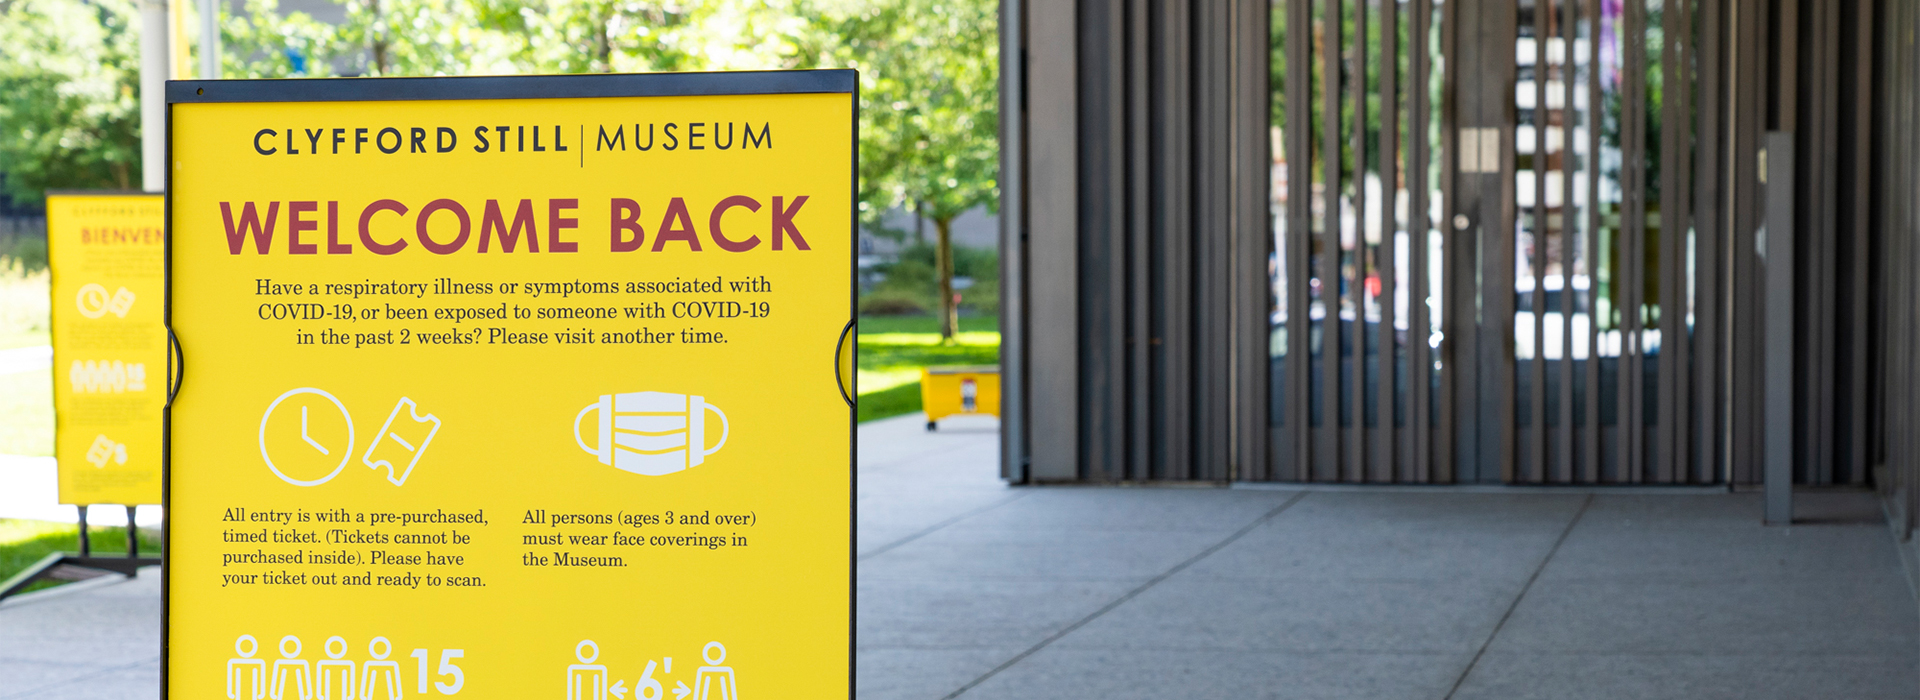 Closeup of a welcome back sign in front of the entrance to the Clyfford Still Museum